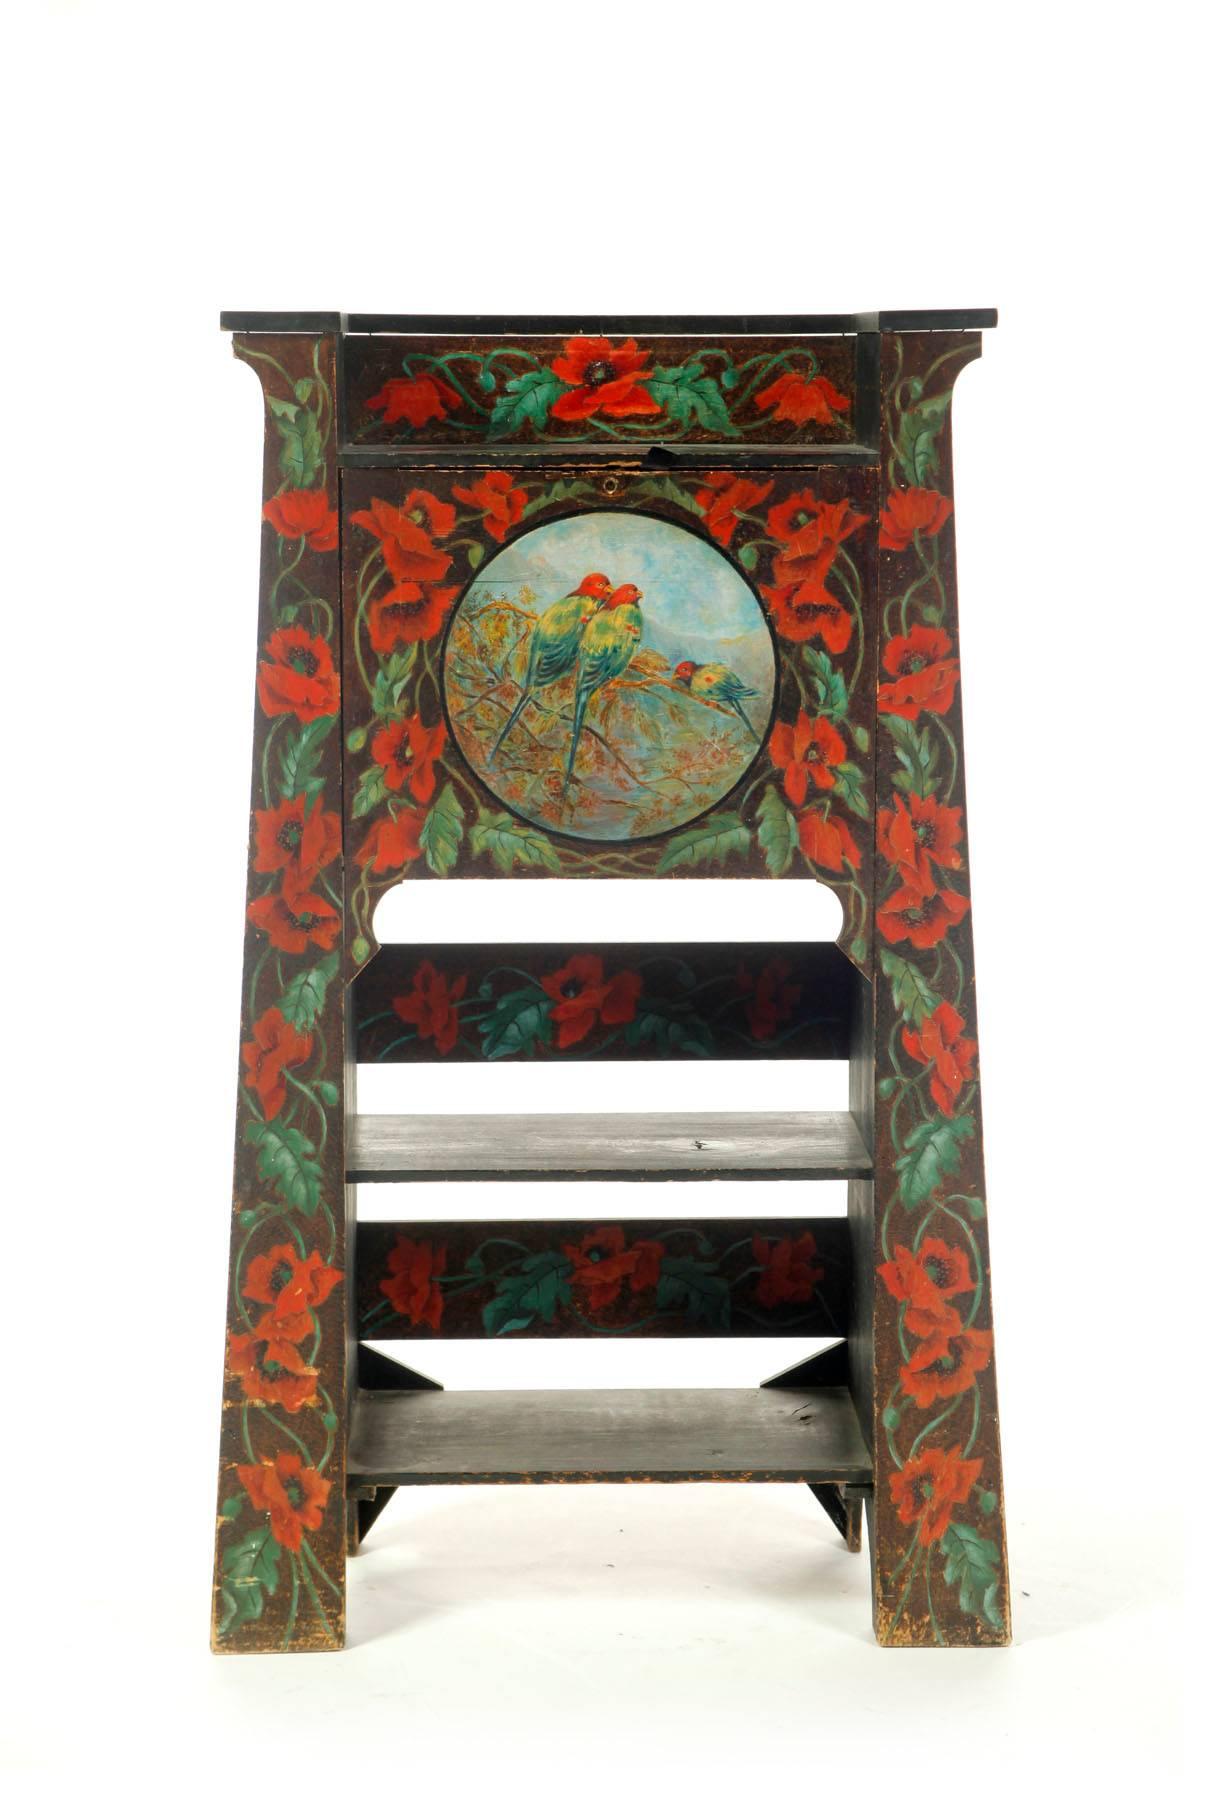 Love Birds and Poppies

This is an original and beautiful hand-painted and hand incised fall front desk. This unique work of art is hand-painted on front with a roundel of three vibrant and colorful birds against a mountain scape and bouquets and